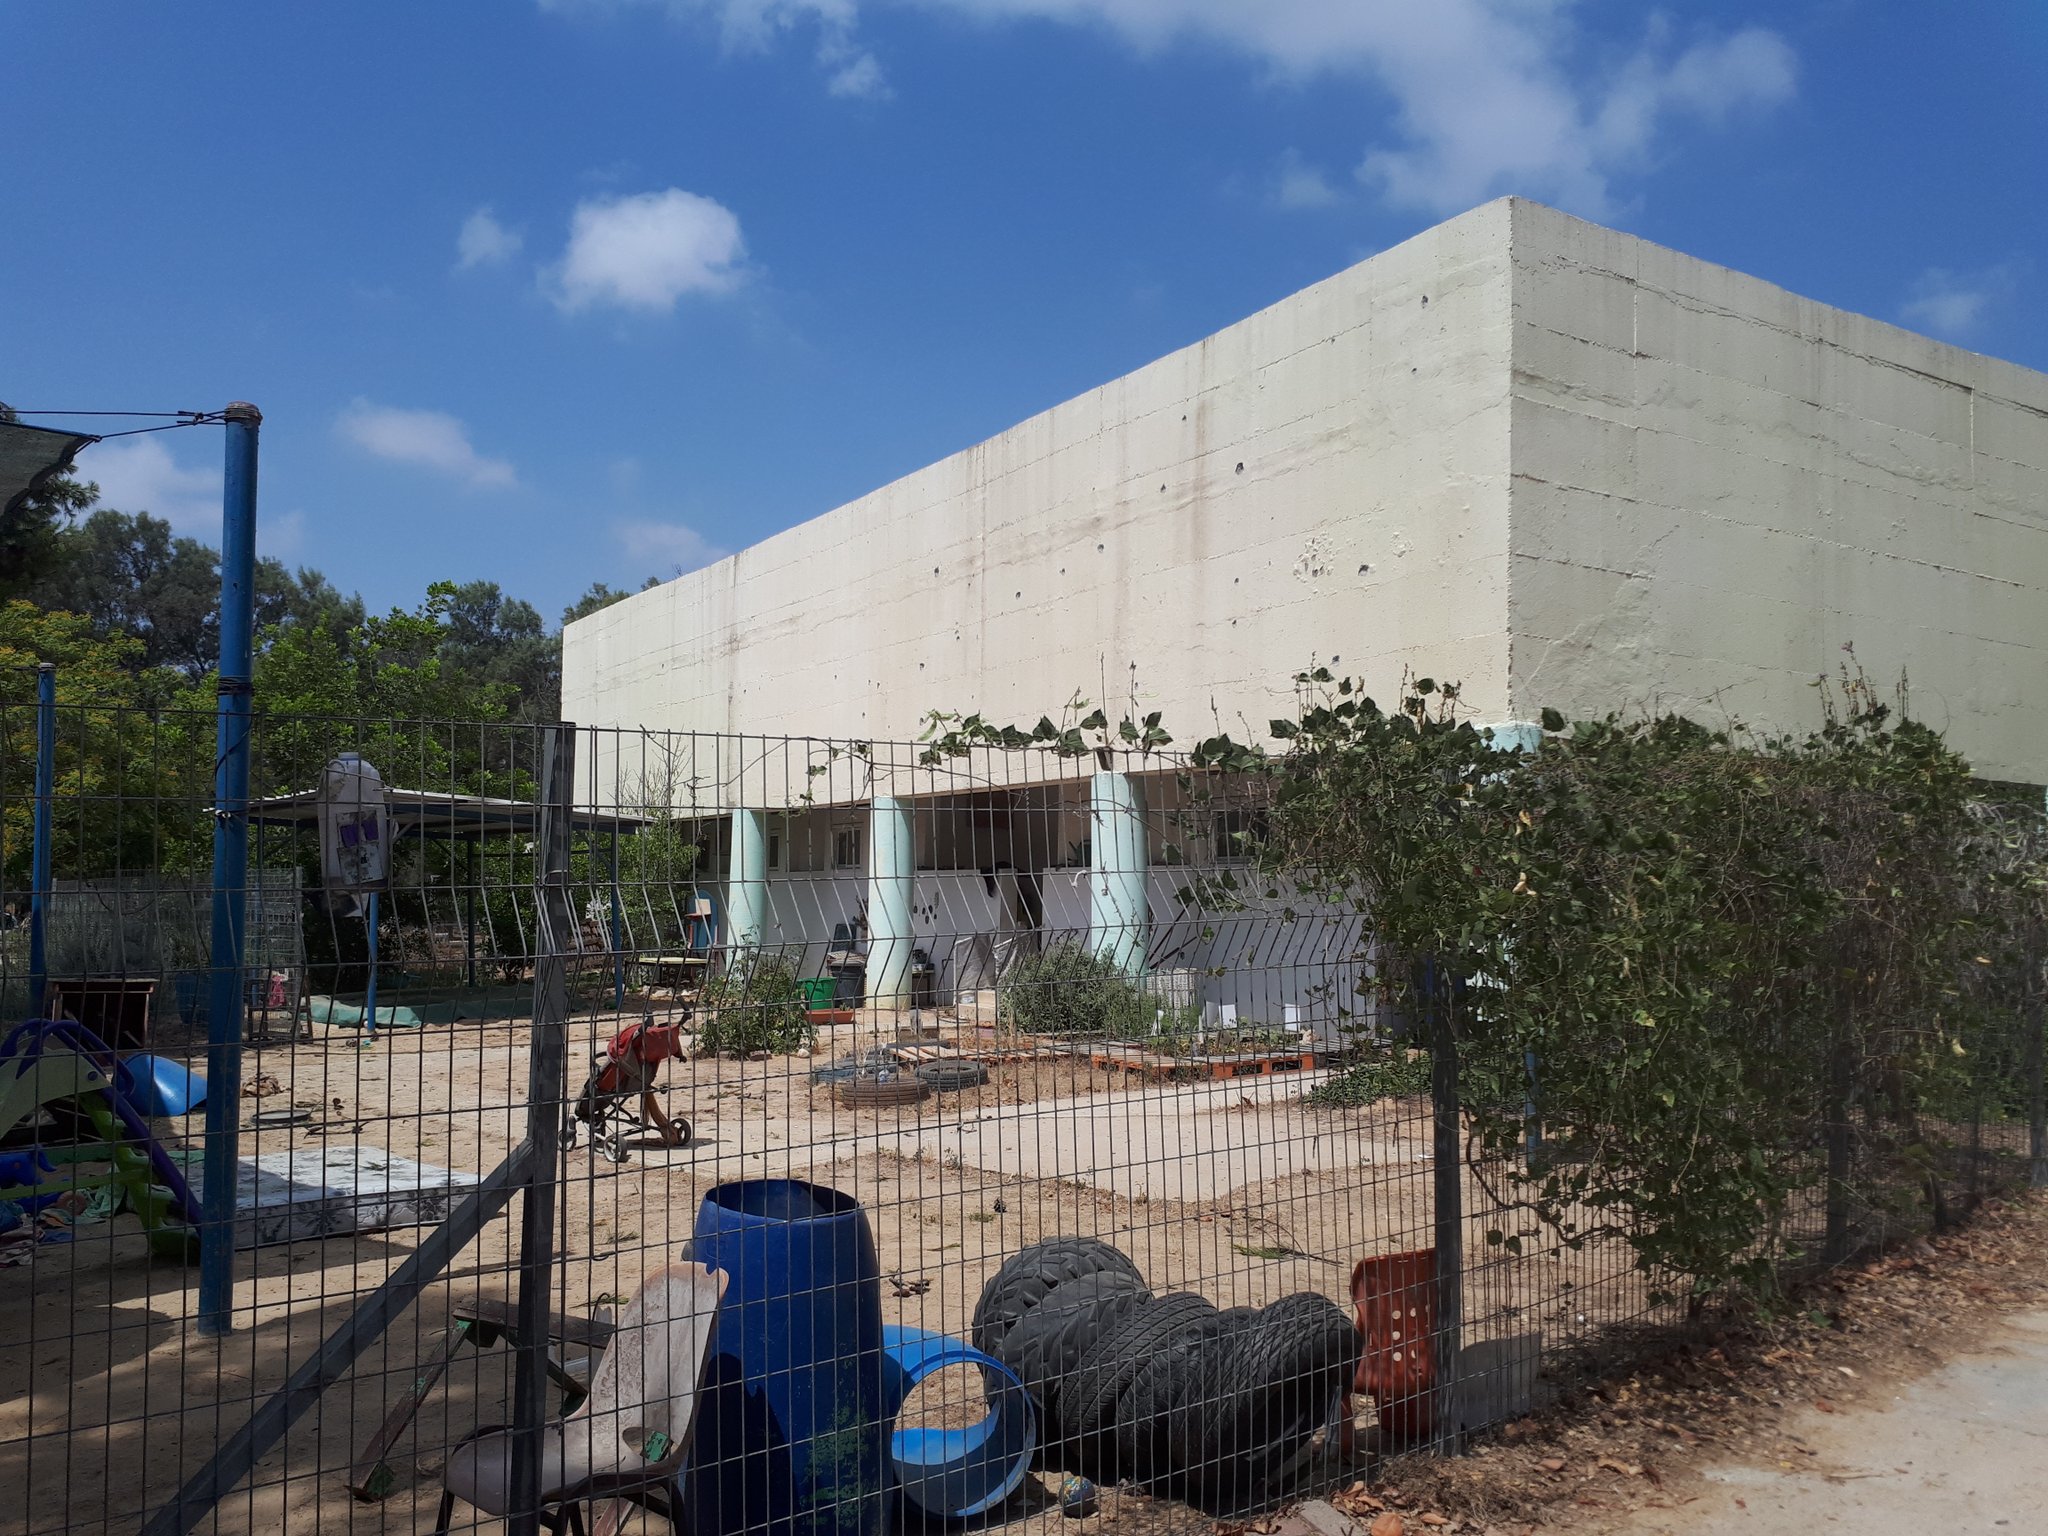 Kindergarten in southern Israel where a mortar fired from Gaza landed